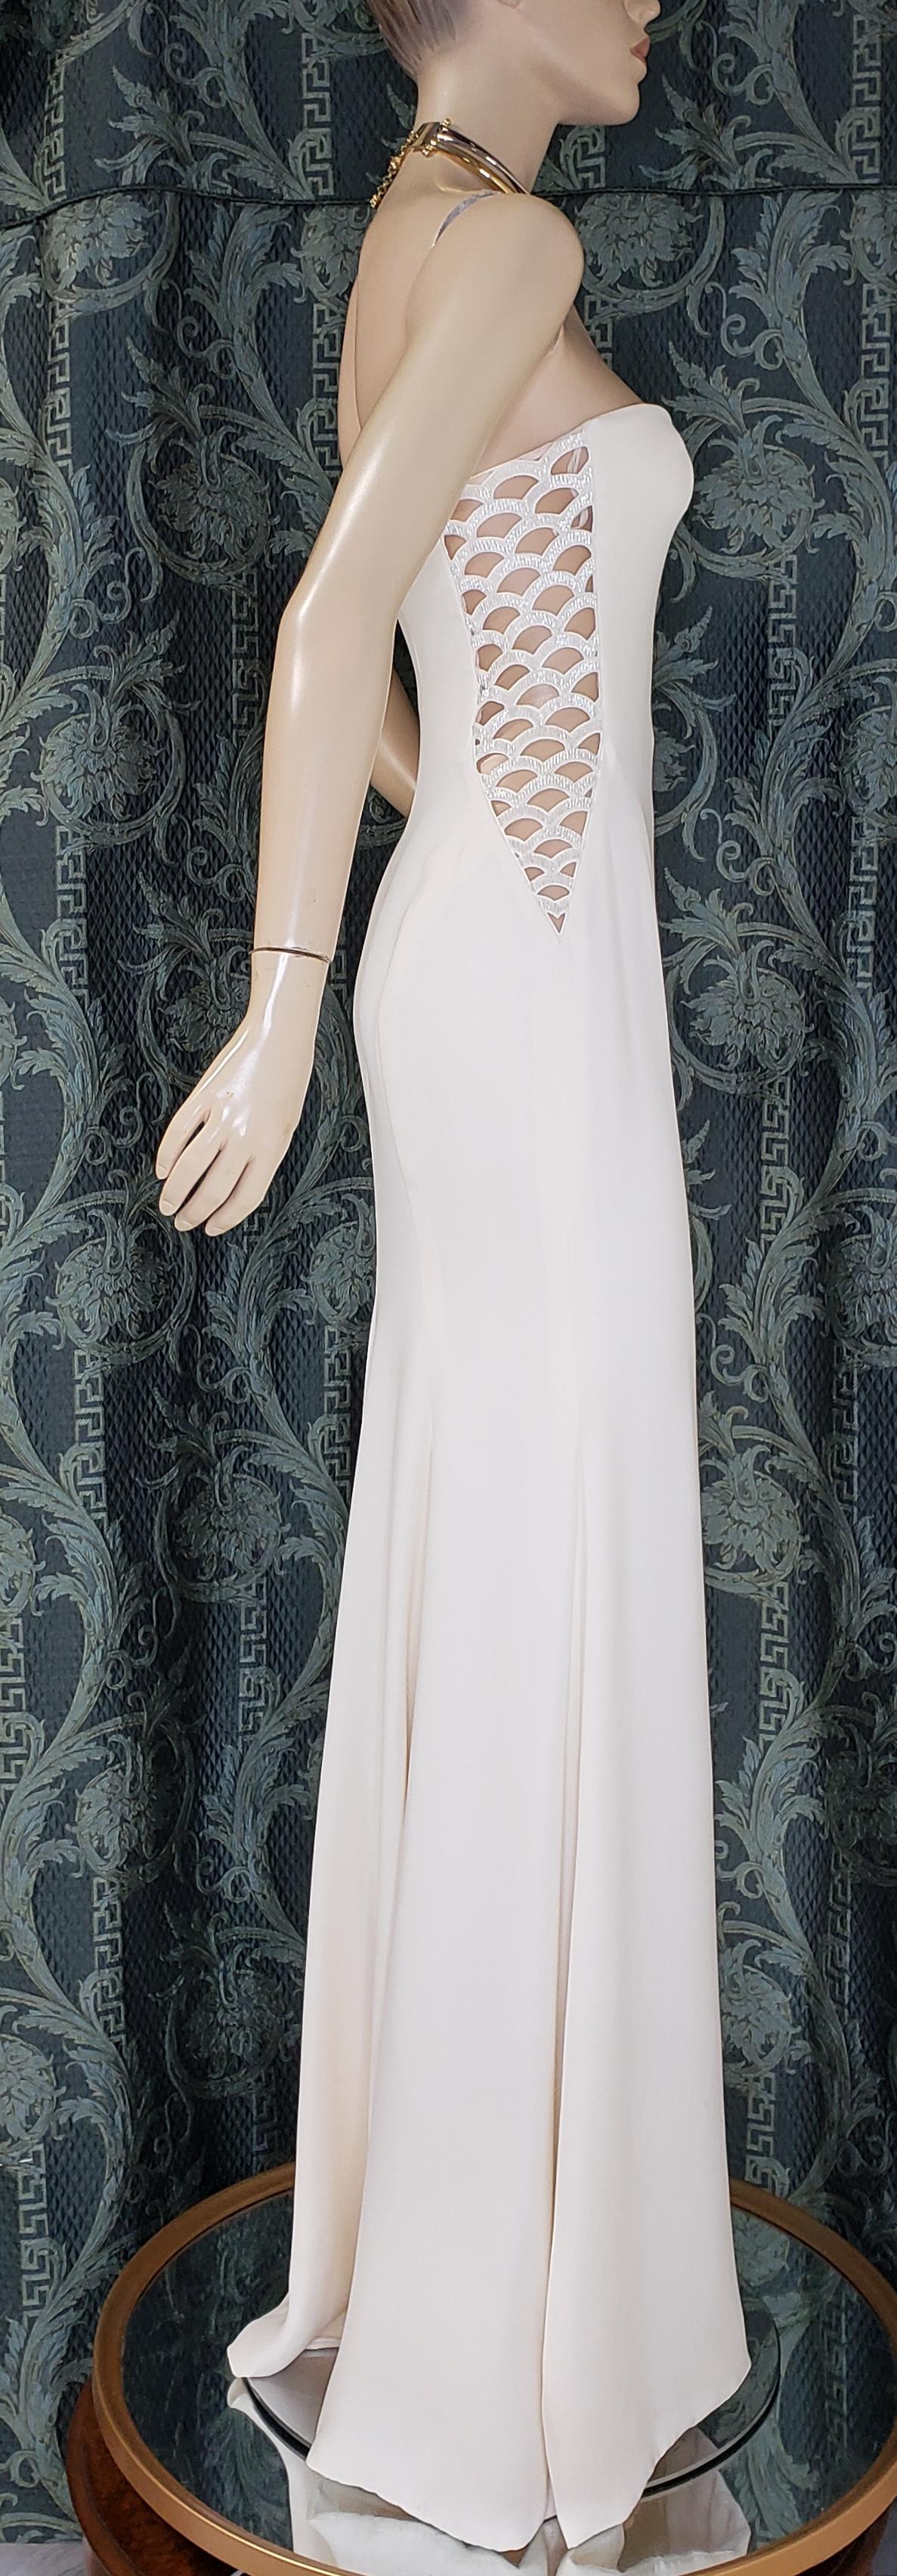 Women's Vintage Gianni Versace Couture Beaded Silk and Tulle White Gown 40 - 4